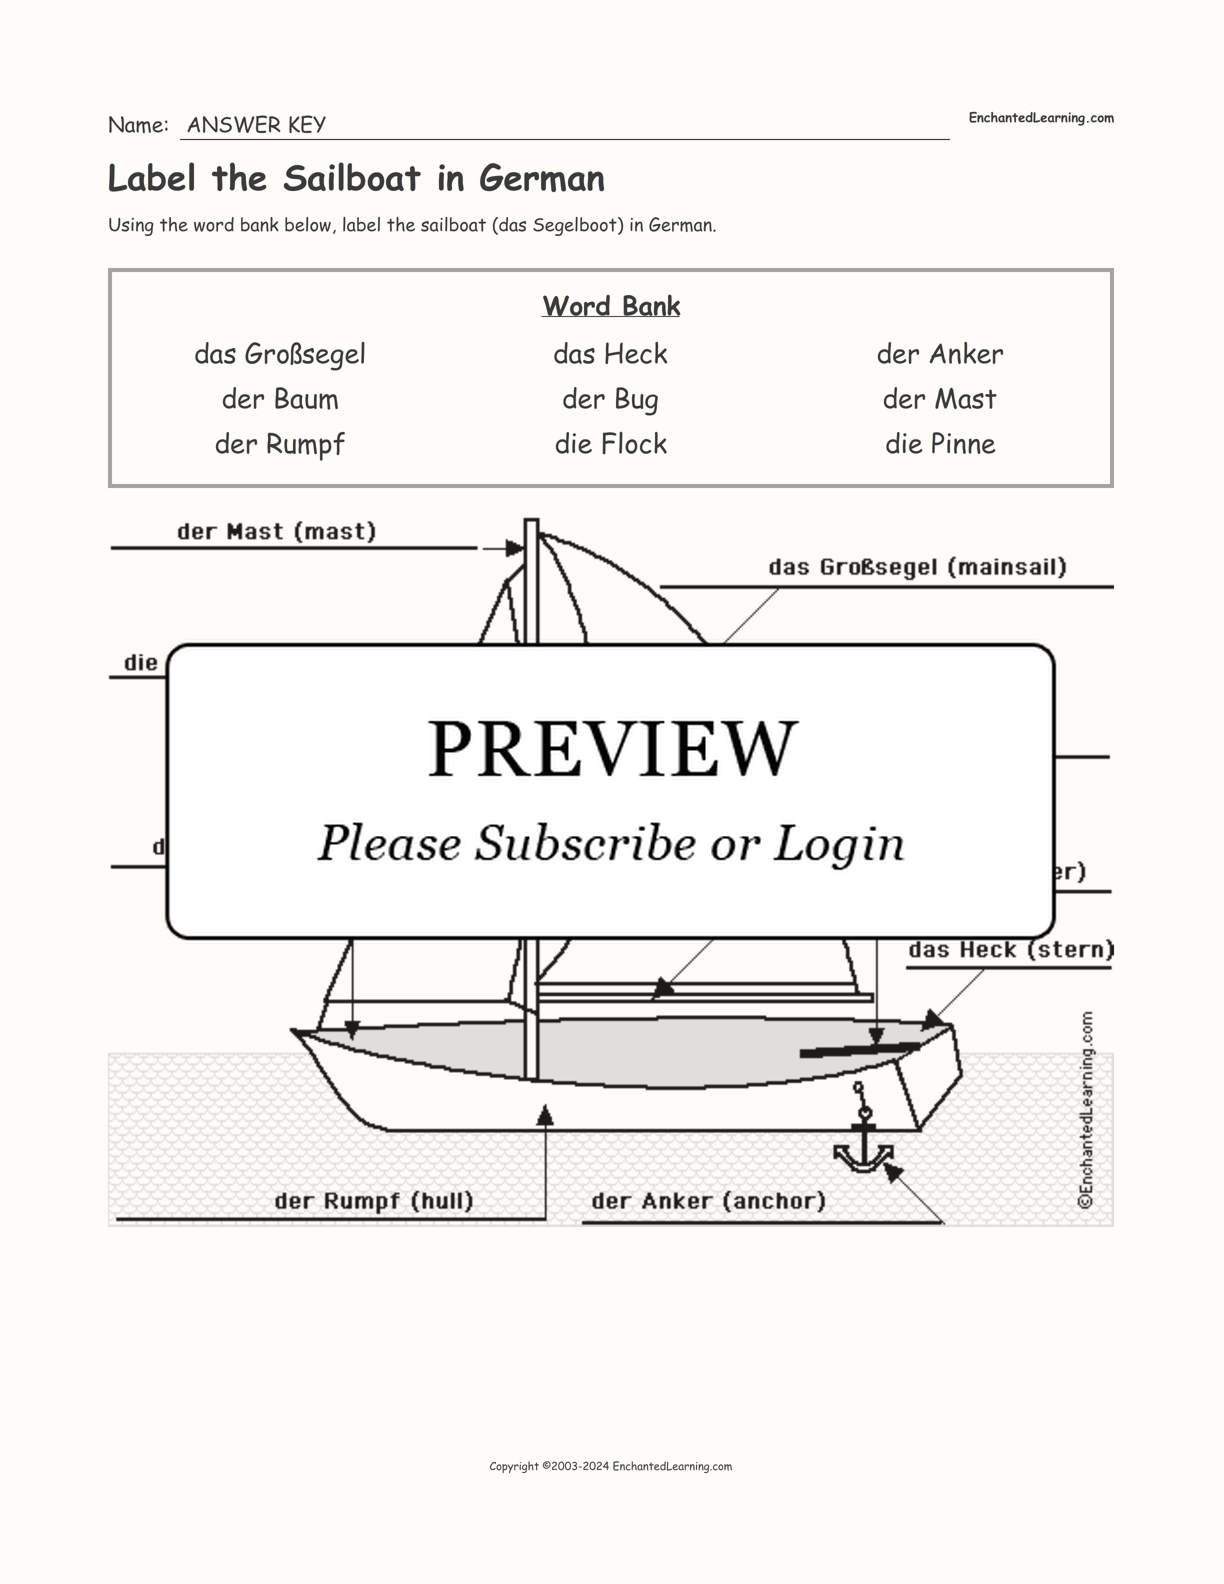 Label the Sailboat in German interactive worksheet page 2